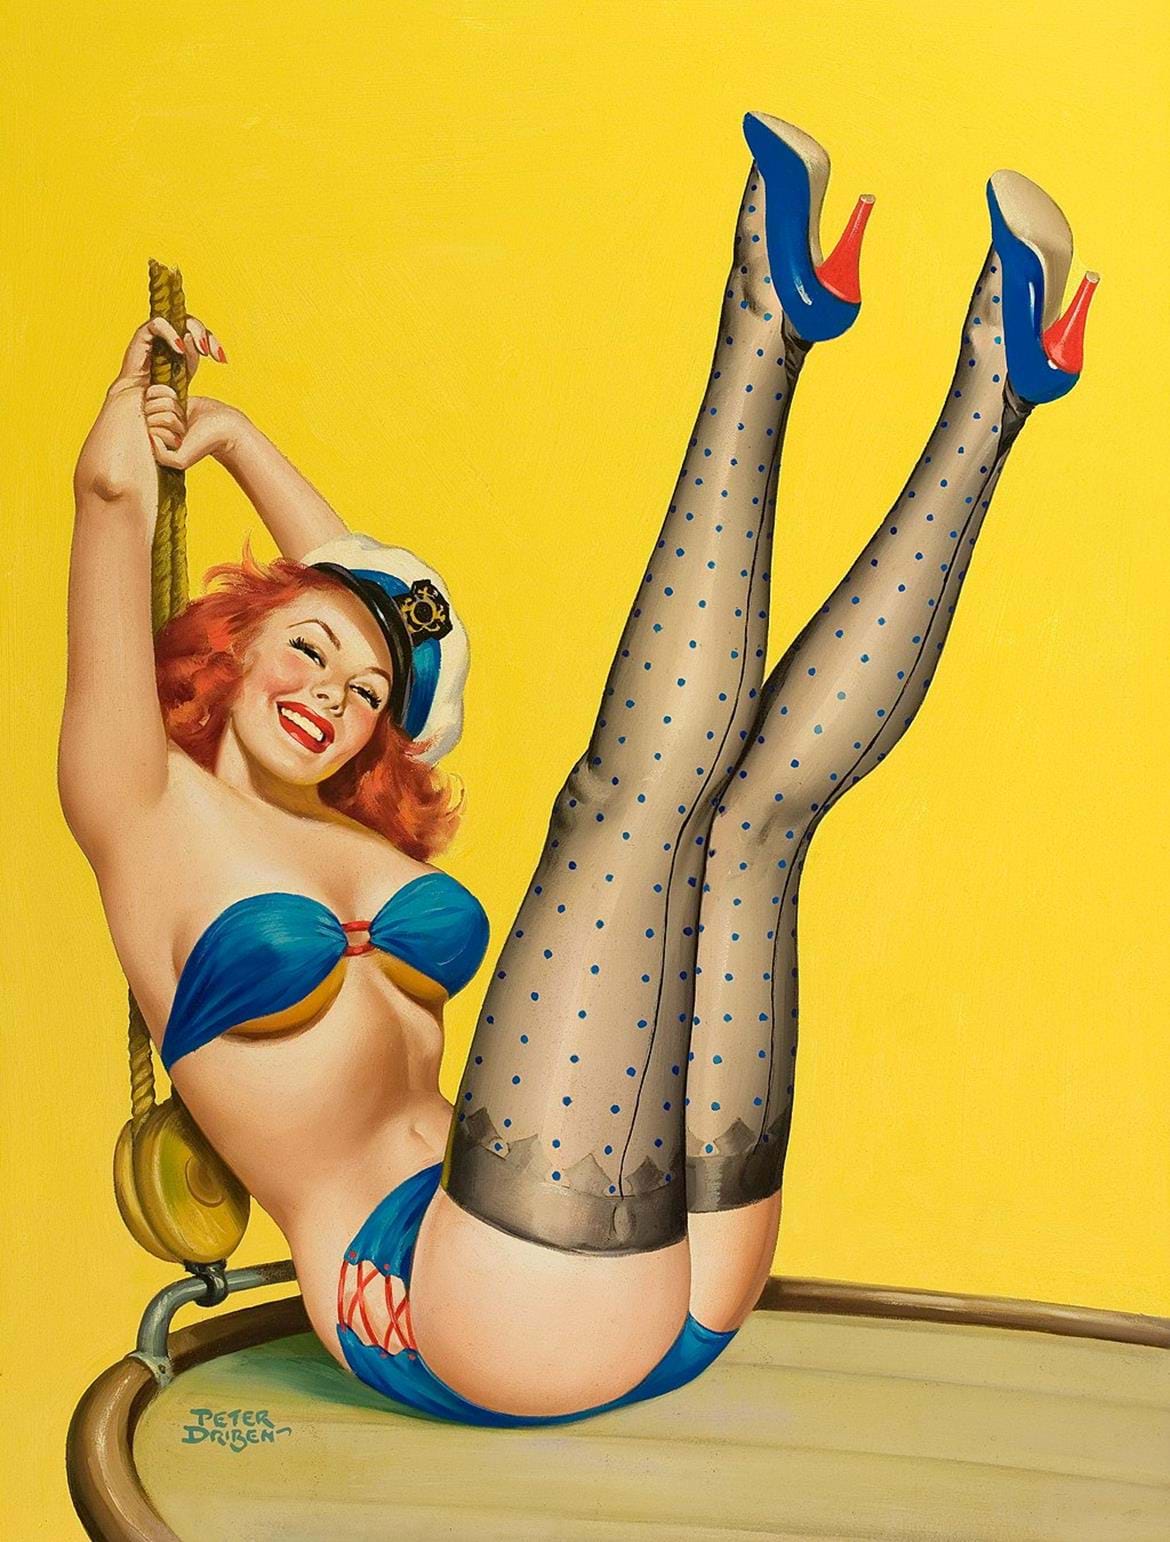 The Women Who Became Pinups